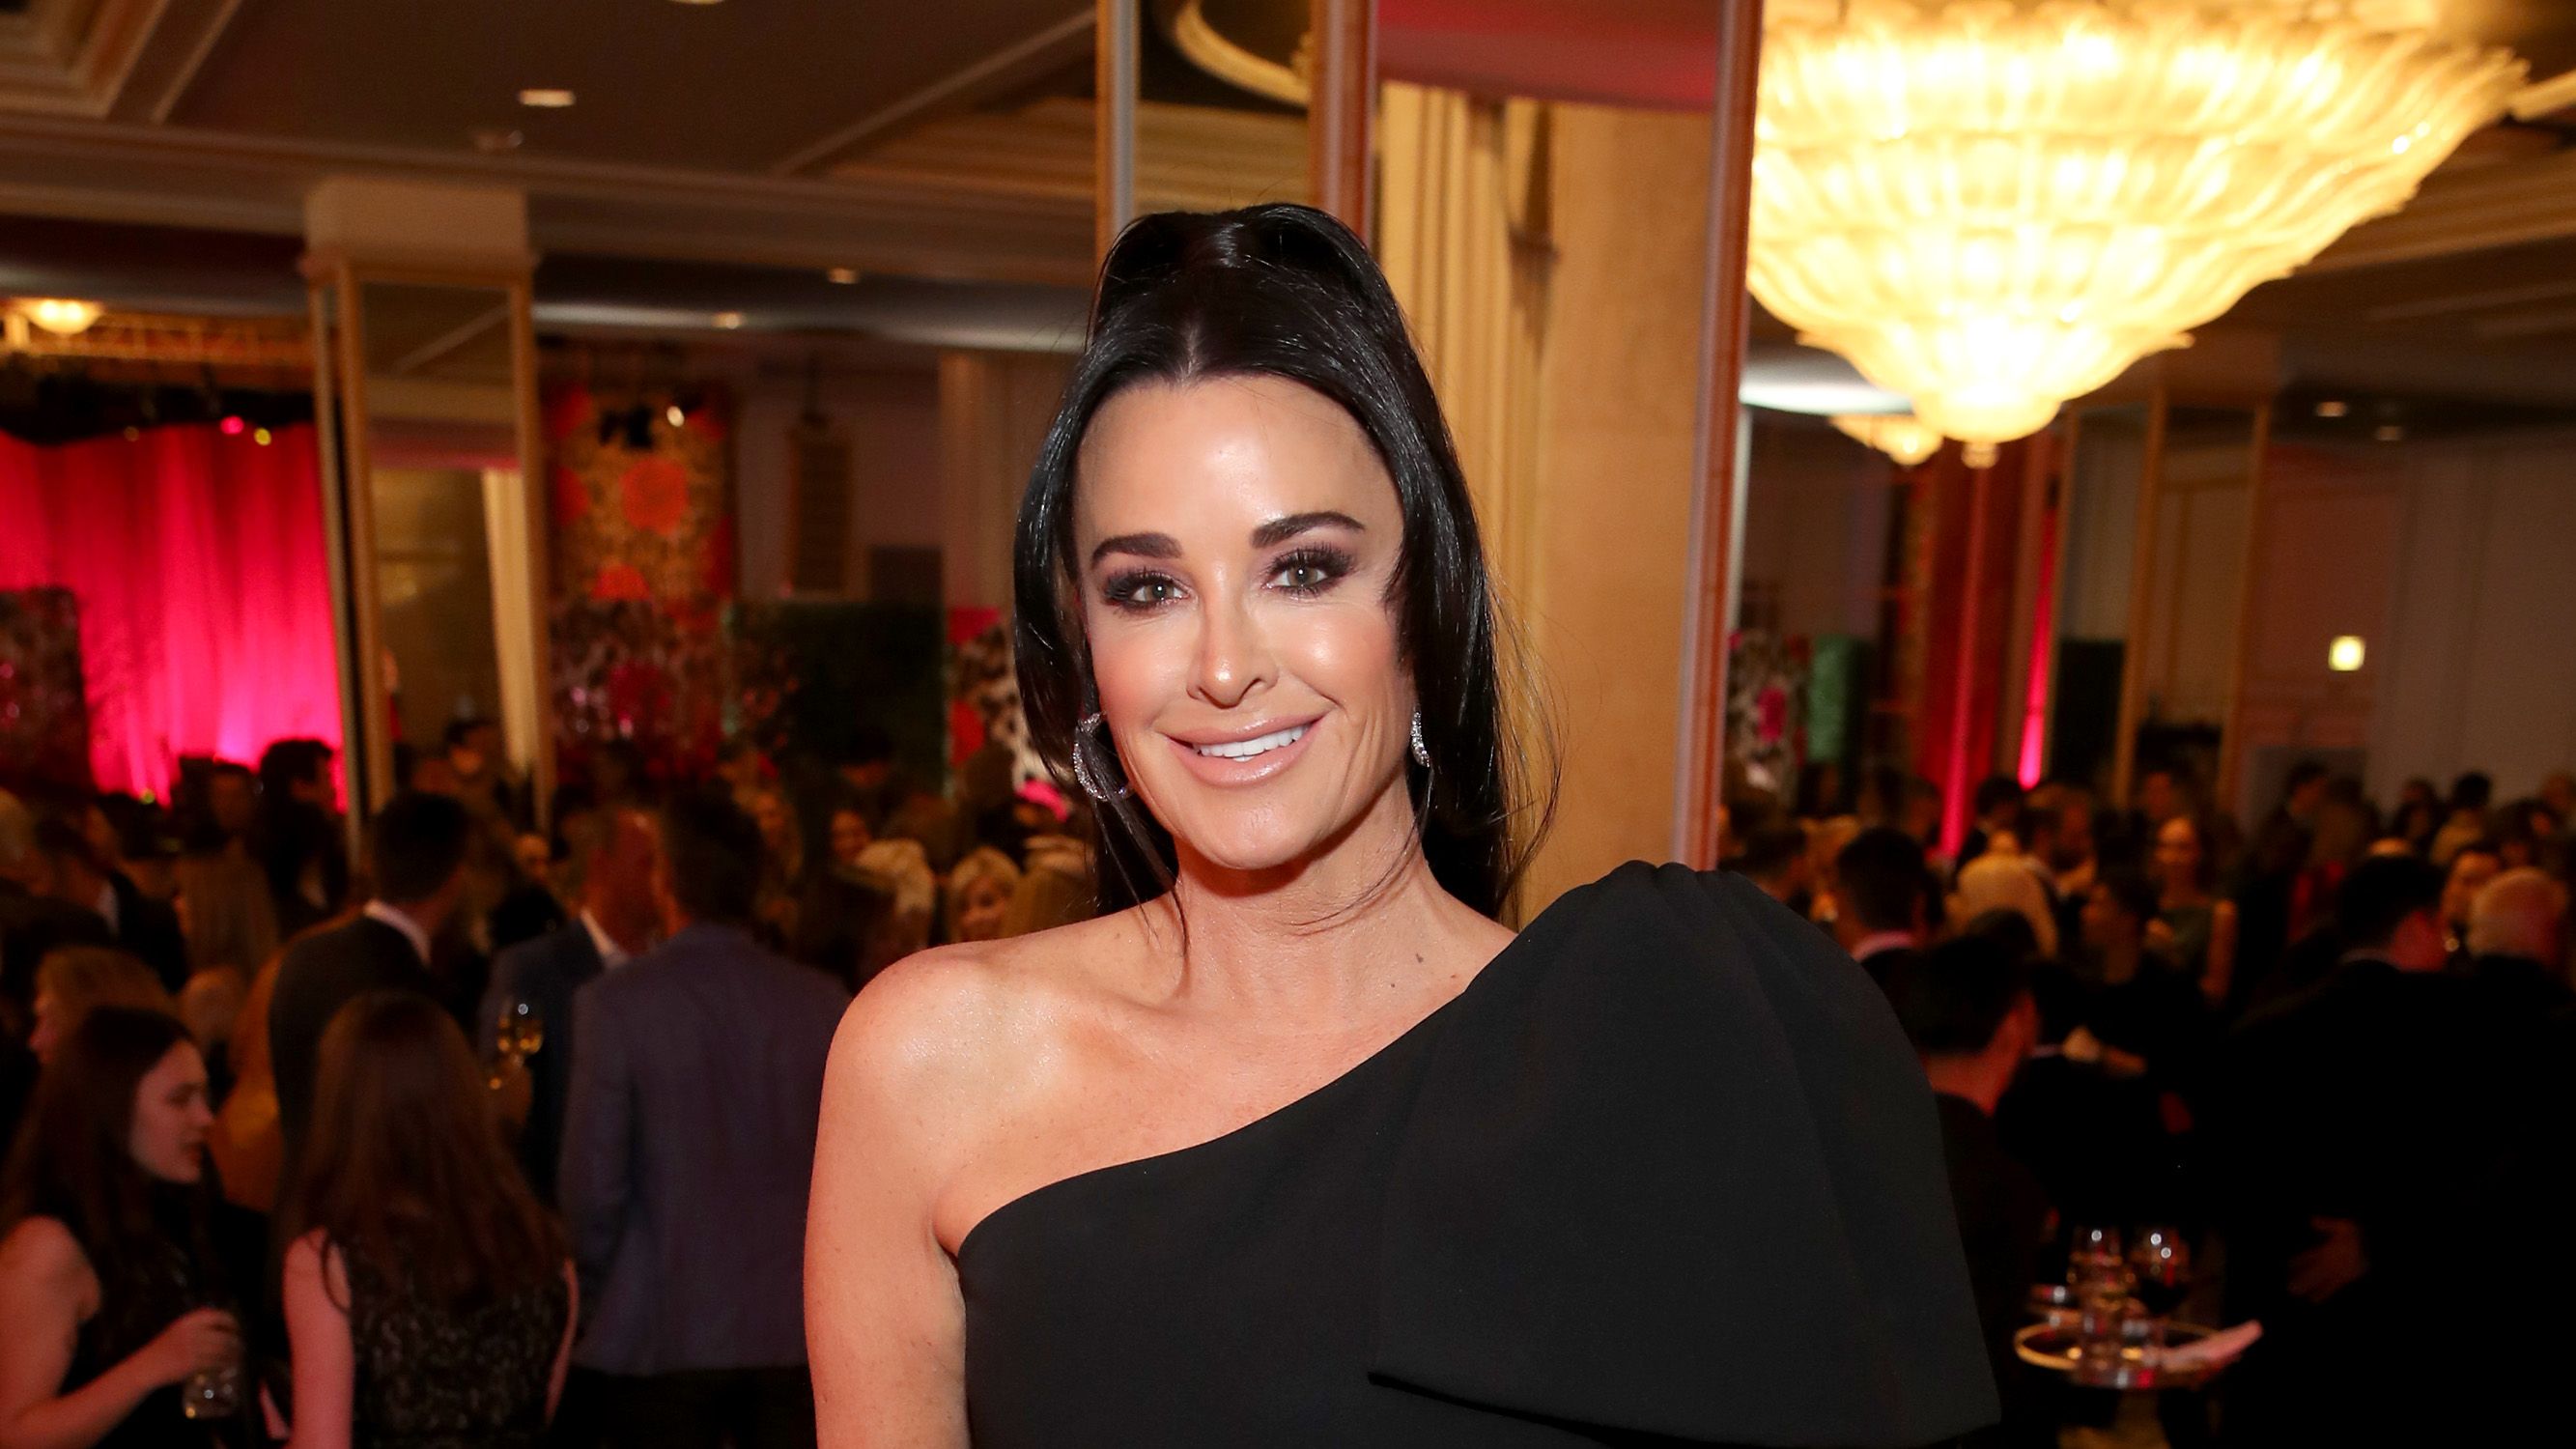 Real Housewives' Star Kyle Richards Gives Us The 'How I Met Your